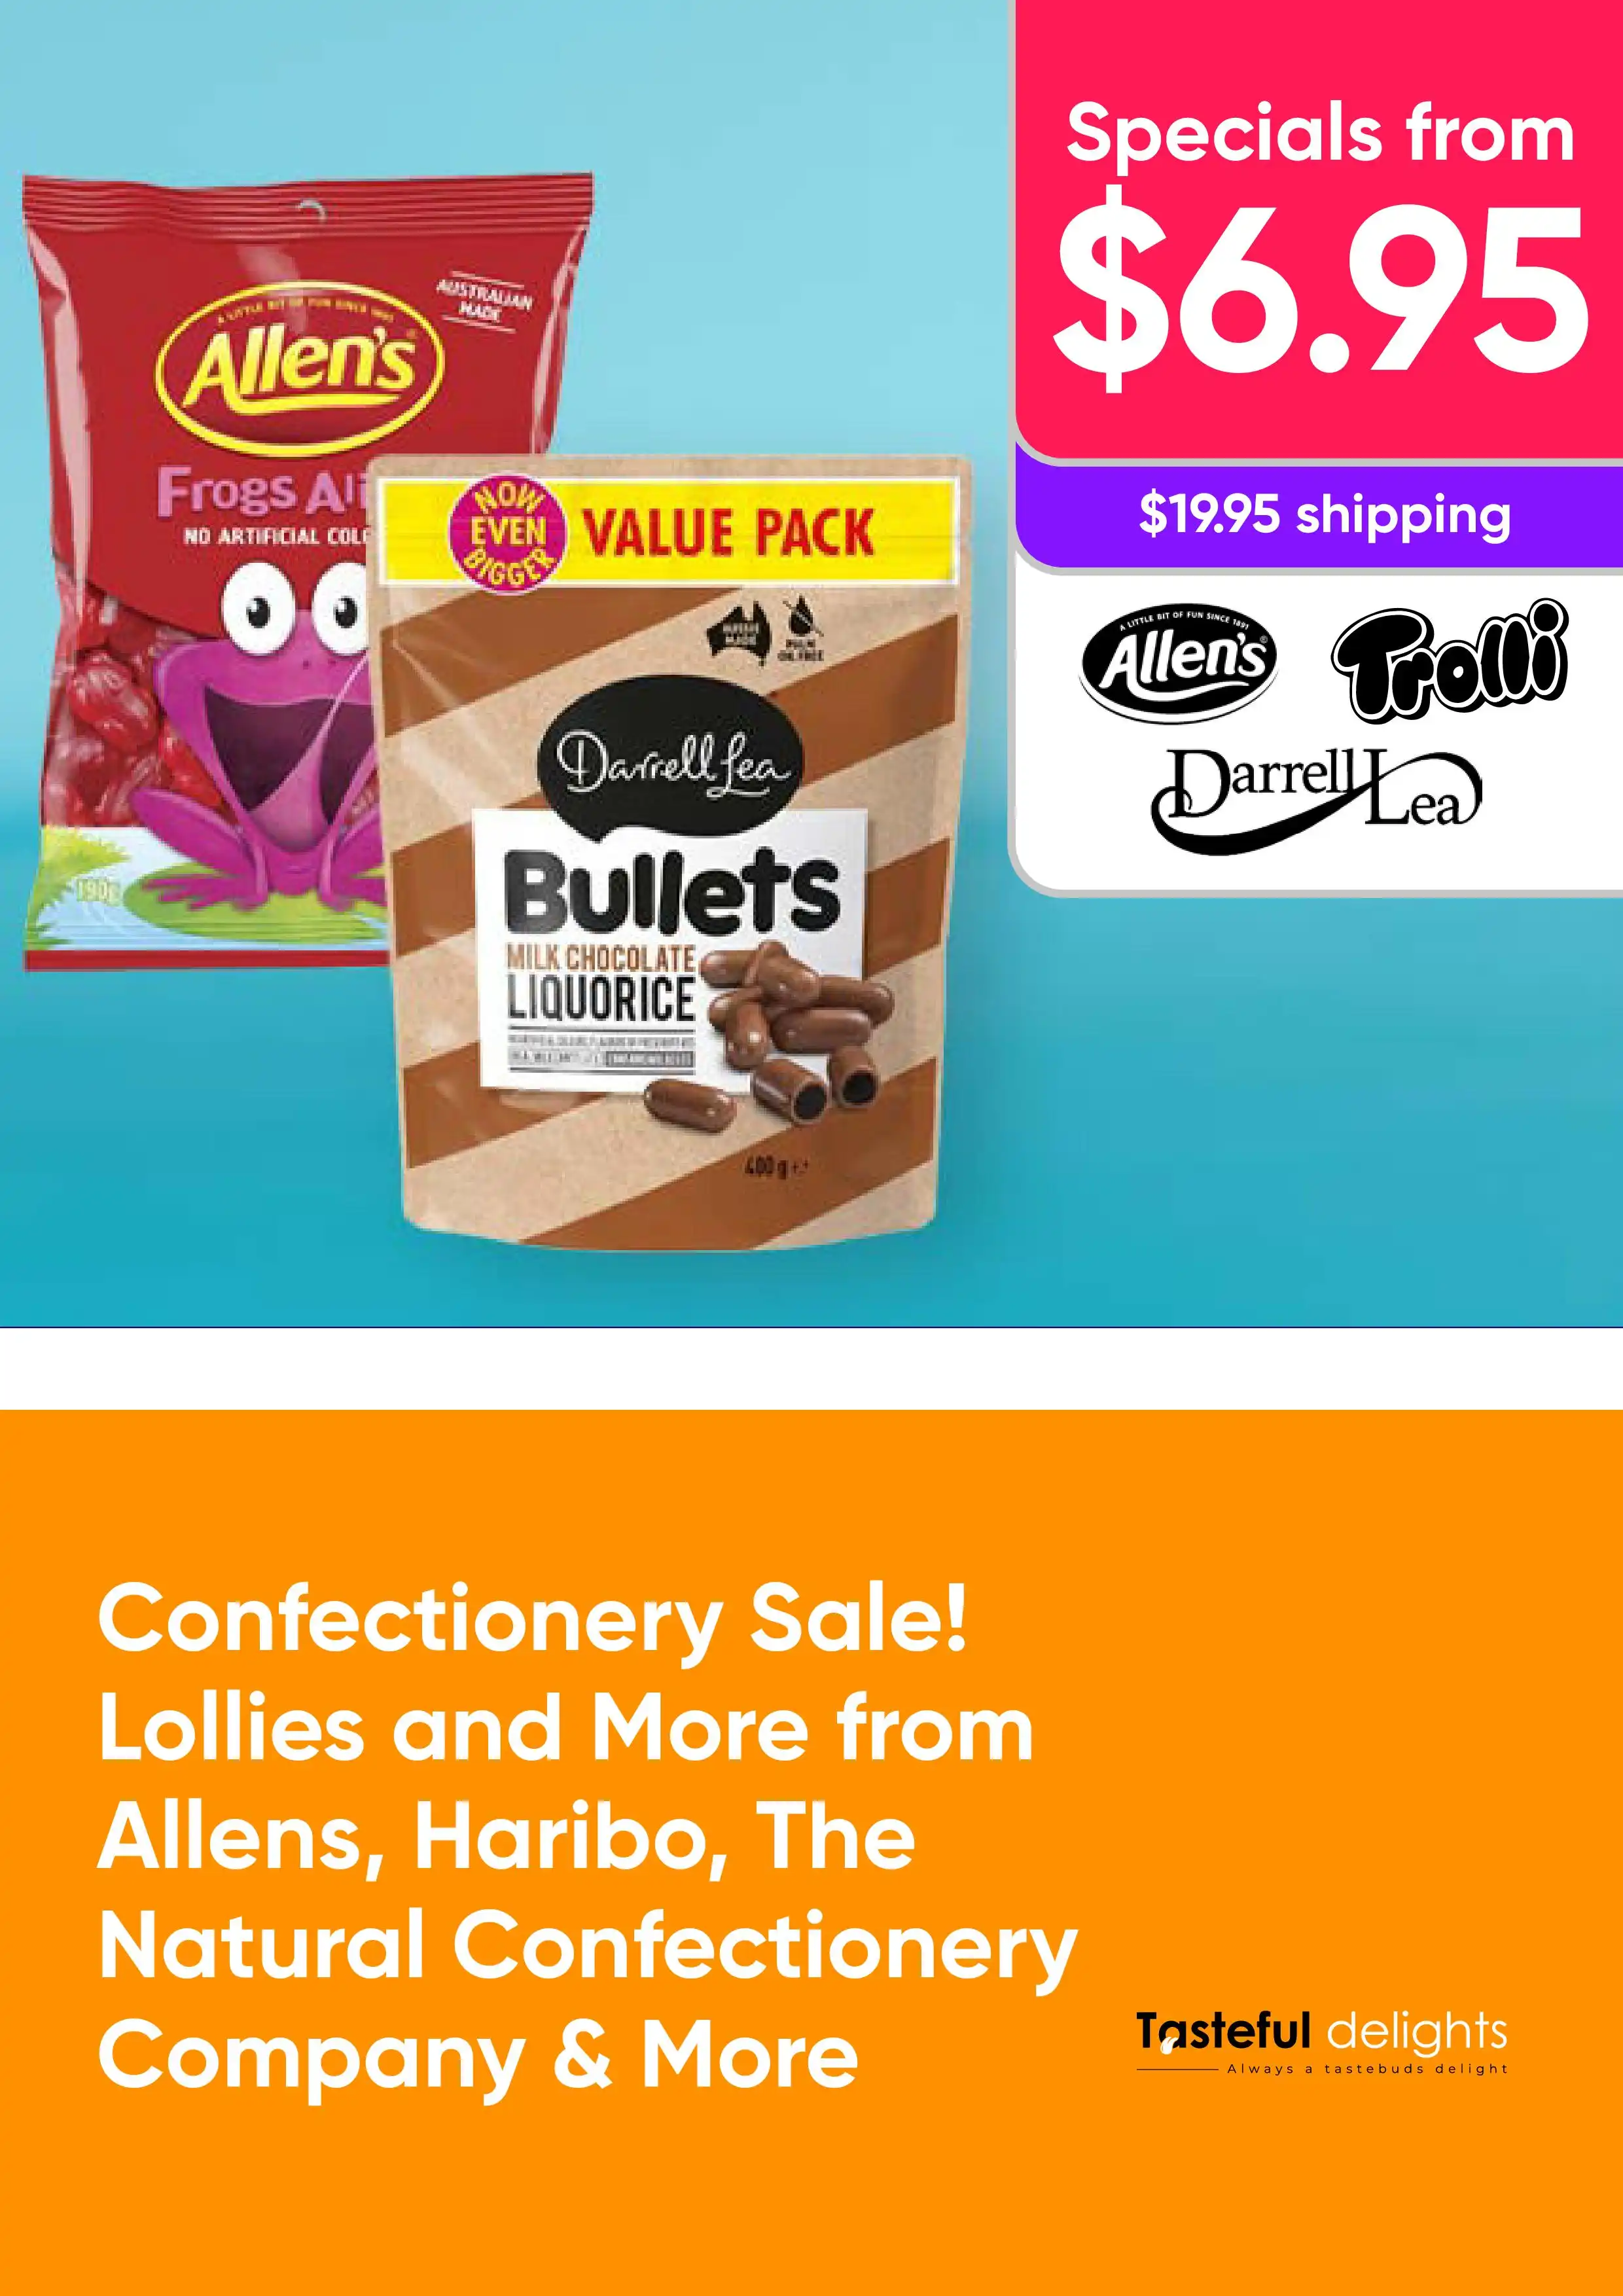 Confectionery Sale! Lollies and more from brands Allens, Hariboo, The Natural Confectionary Company